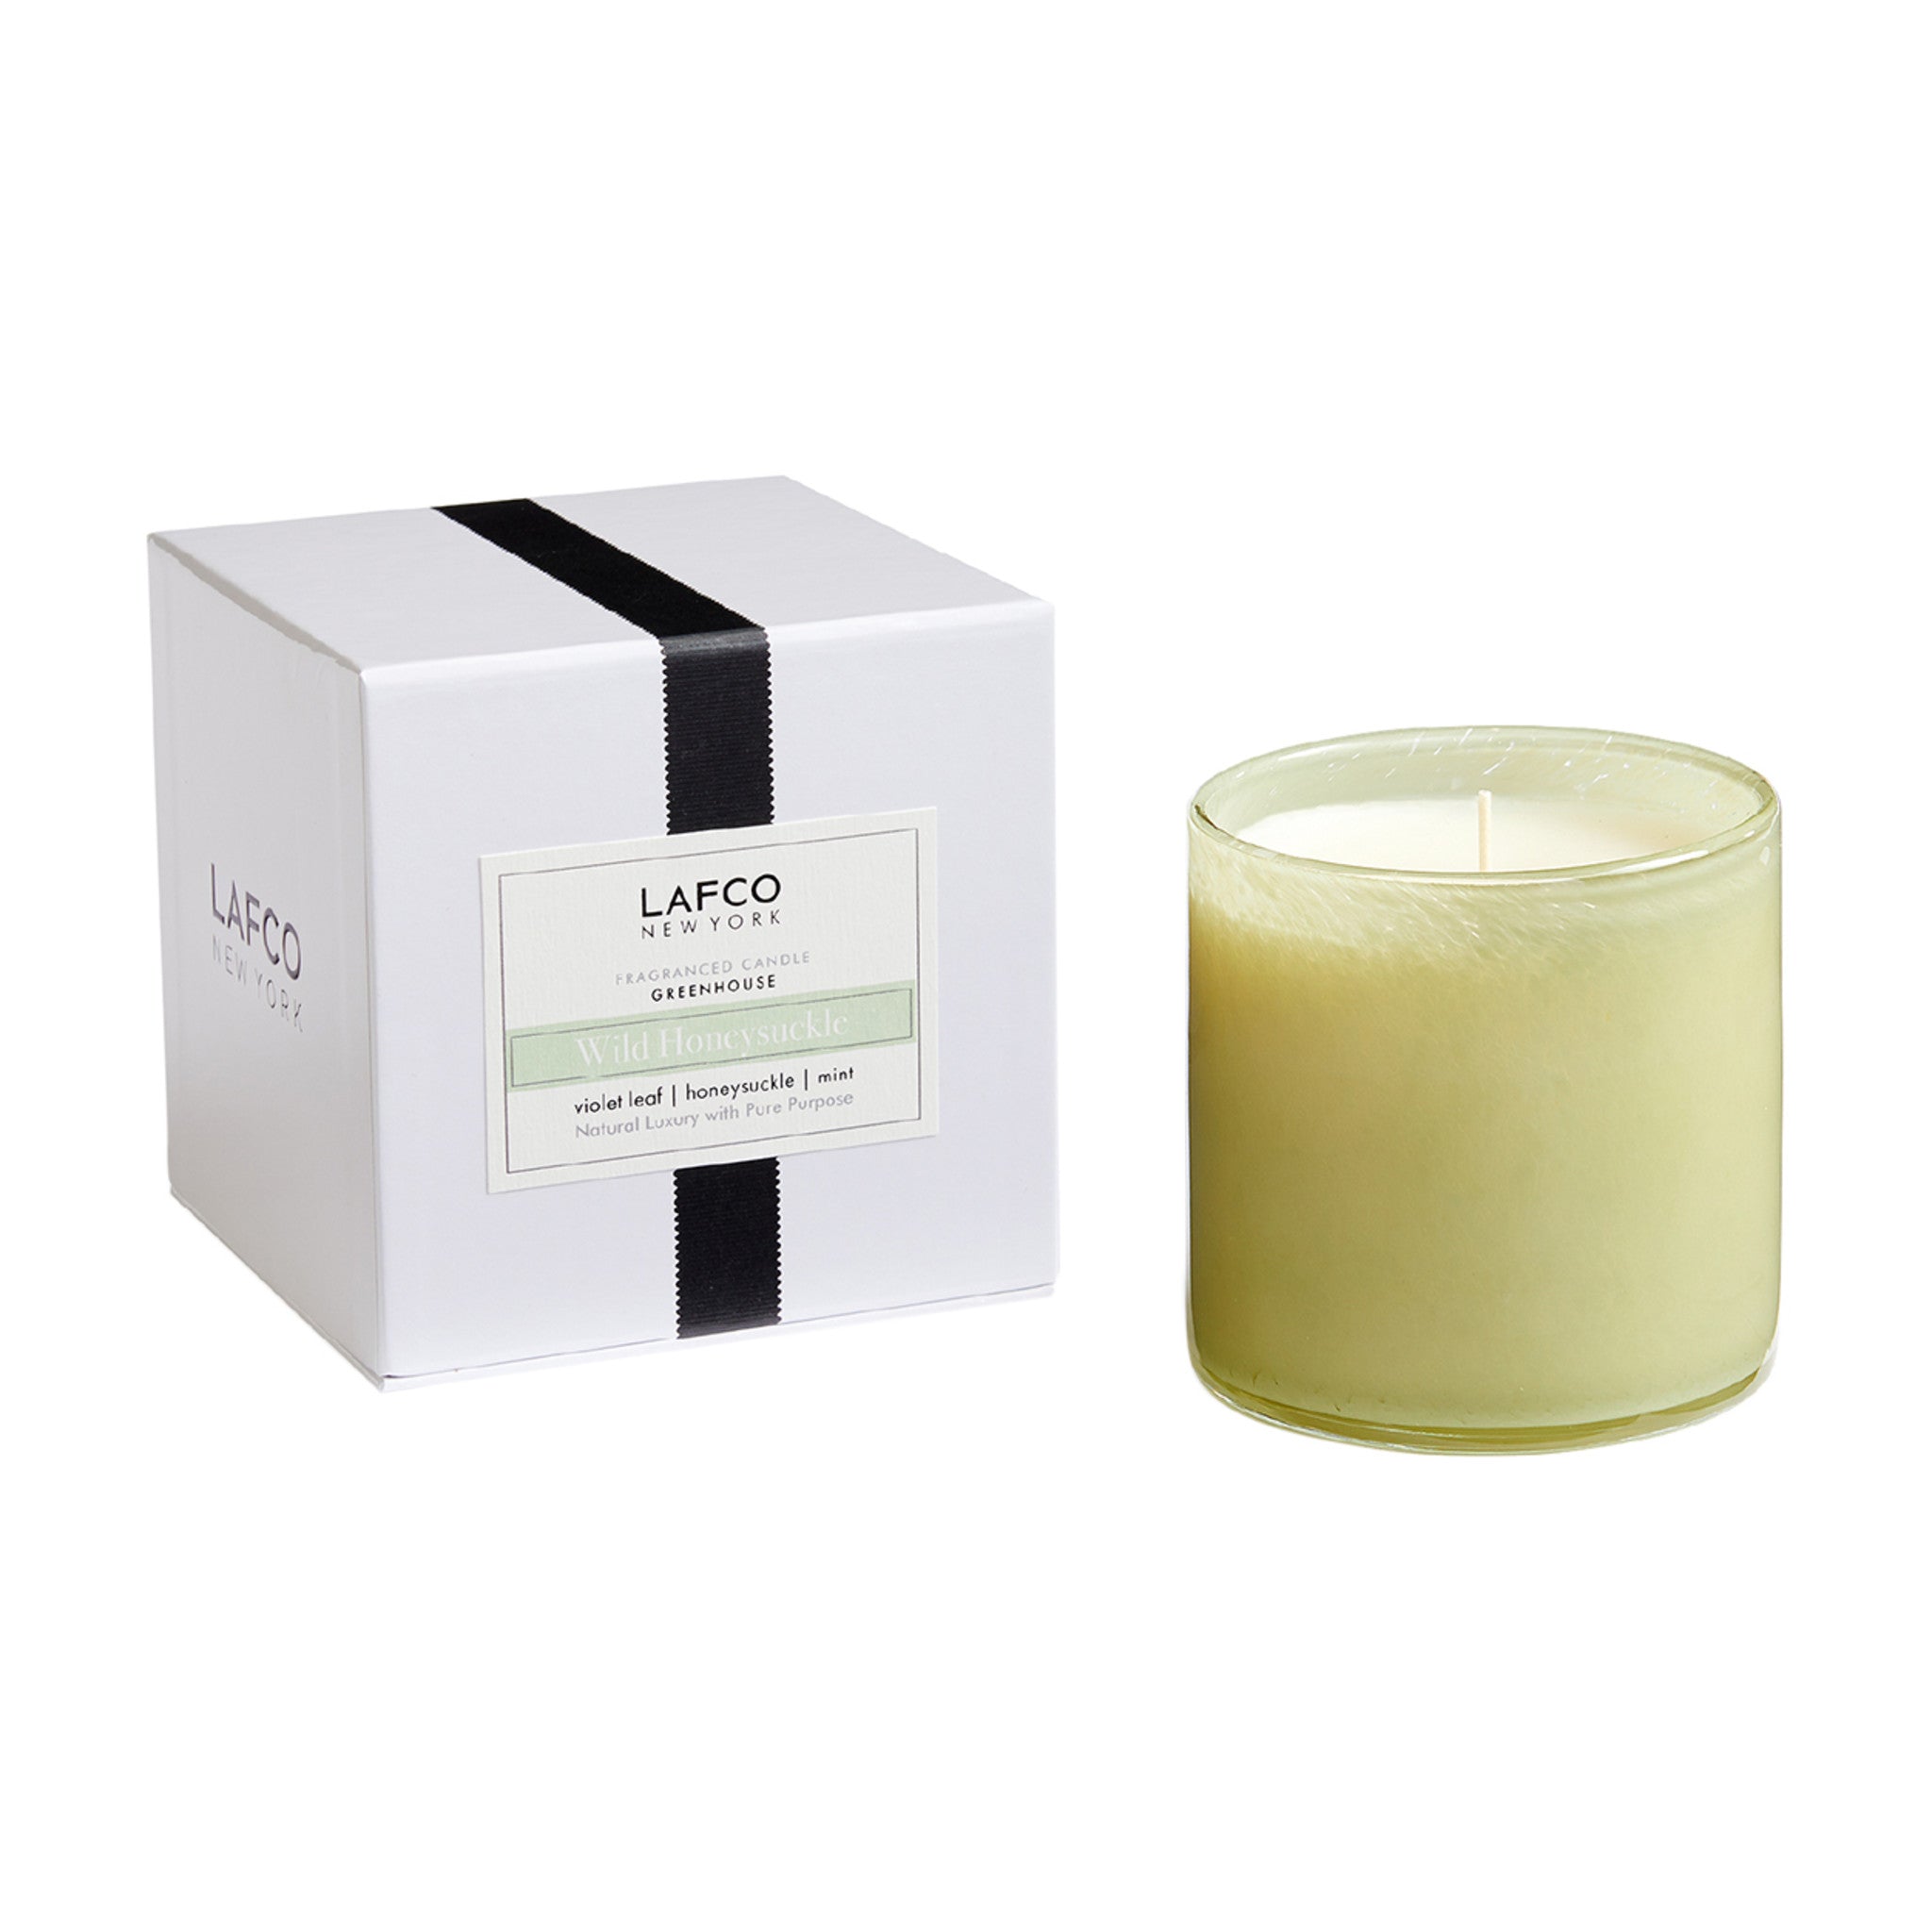 Lafco Wild Honeysuckle Candle Size variant: Signature main image.